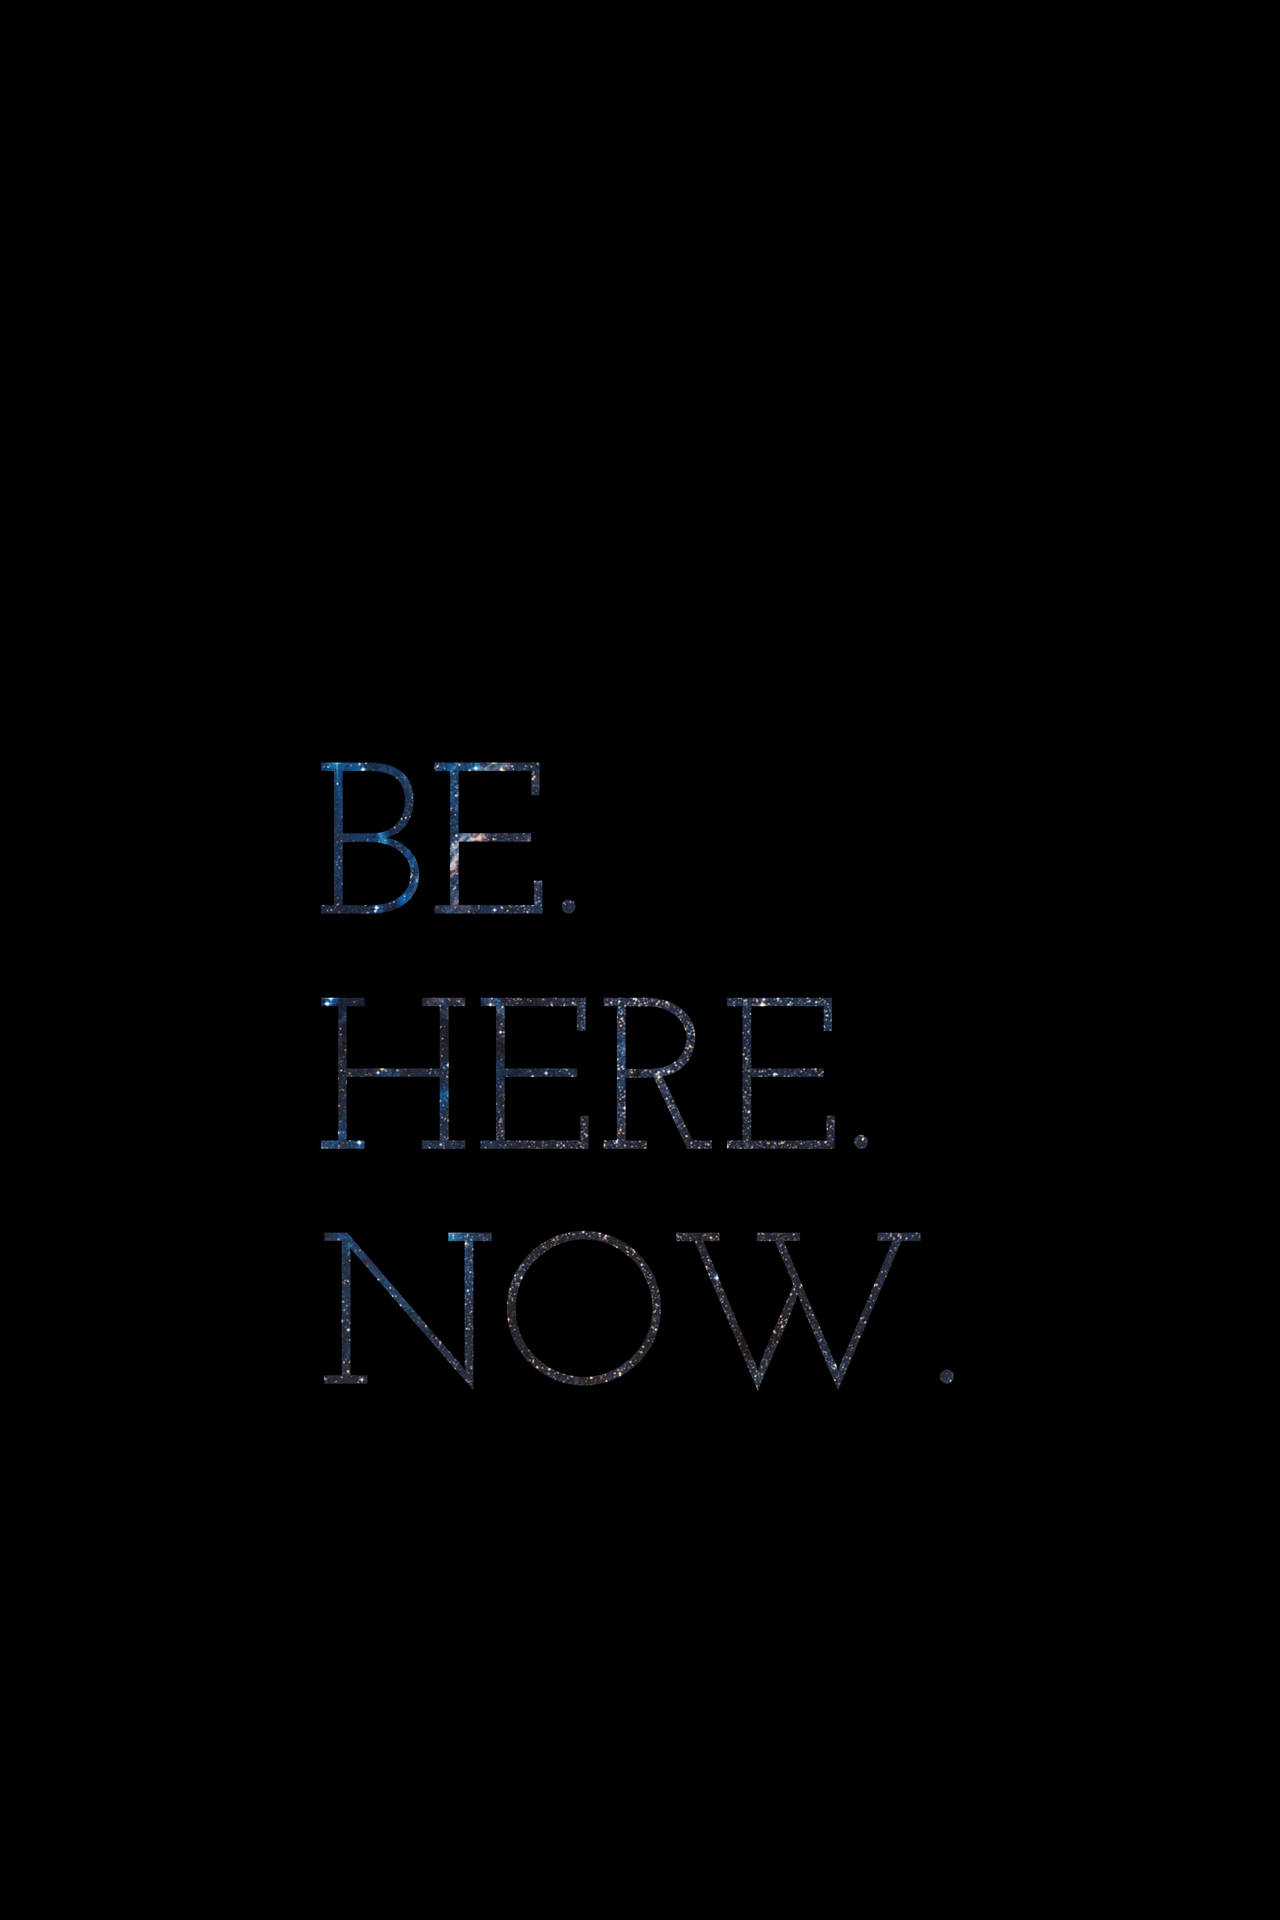 Live in the moment - be here now Wallpaper